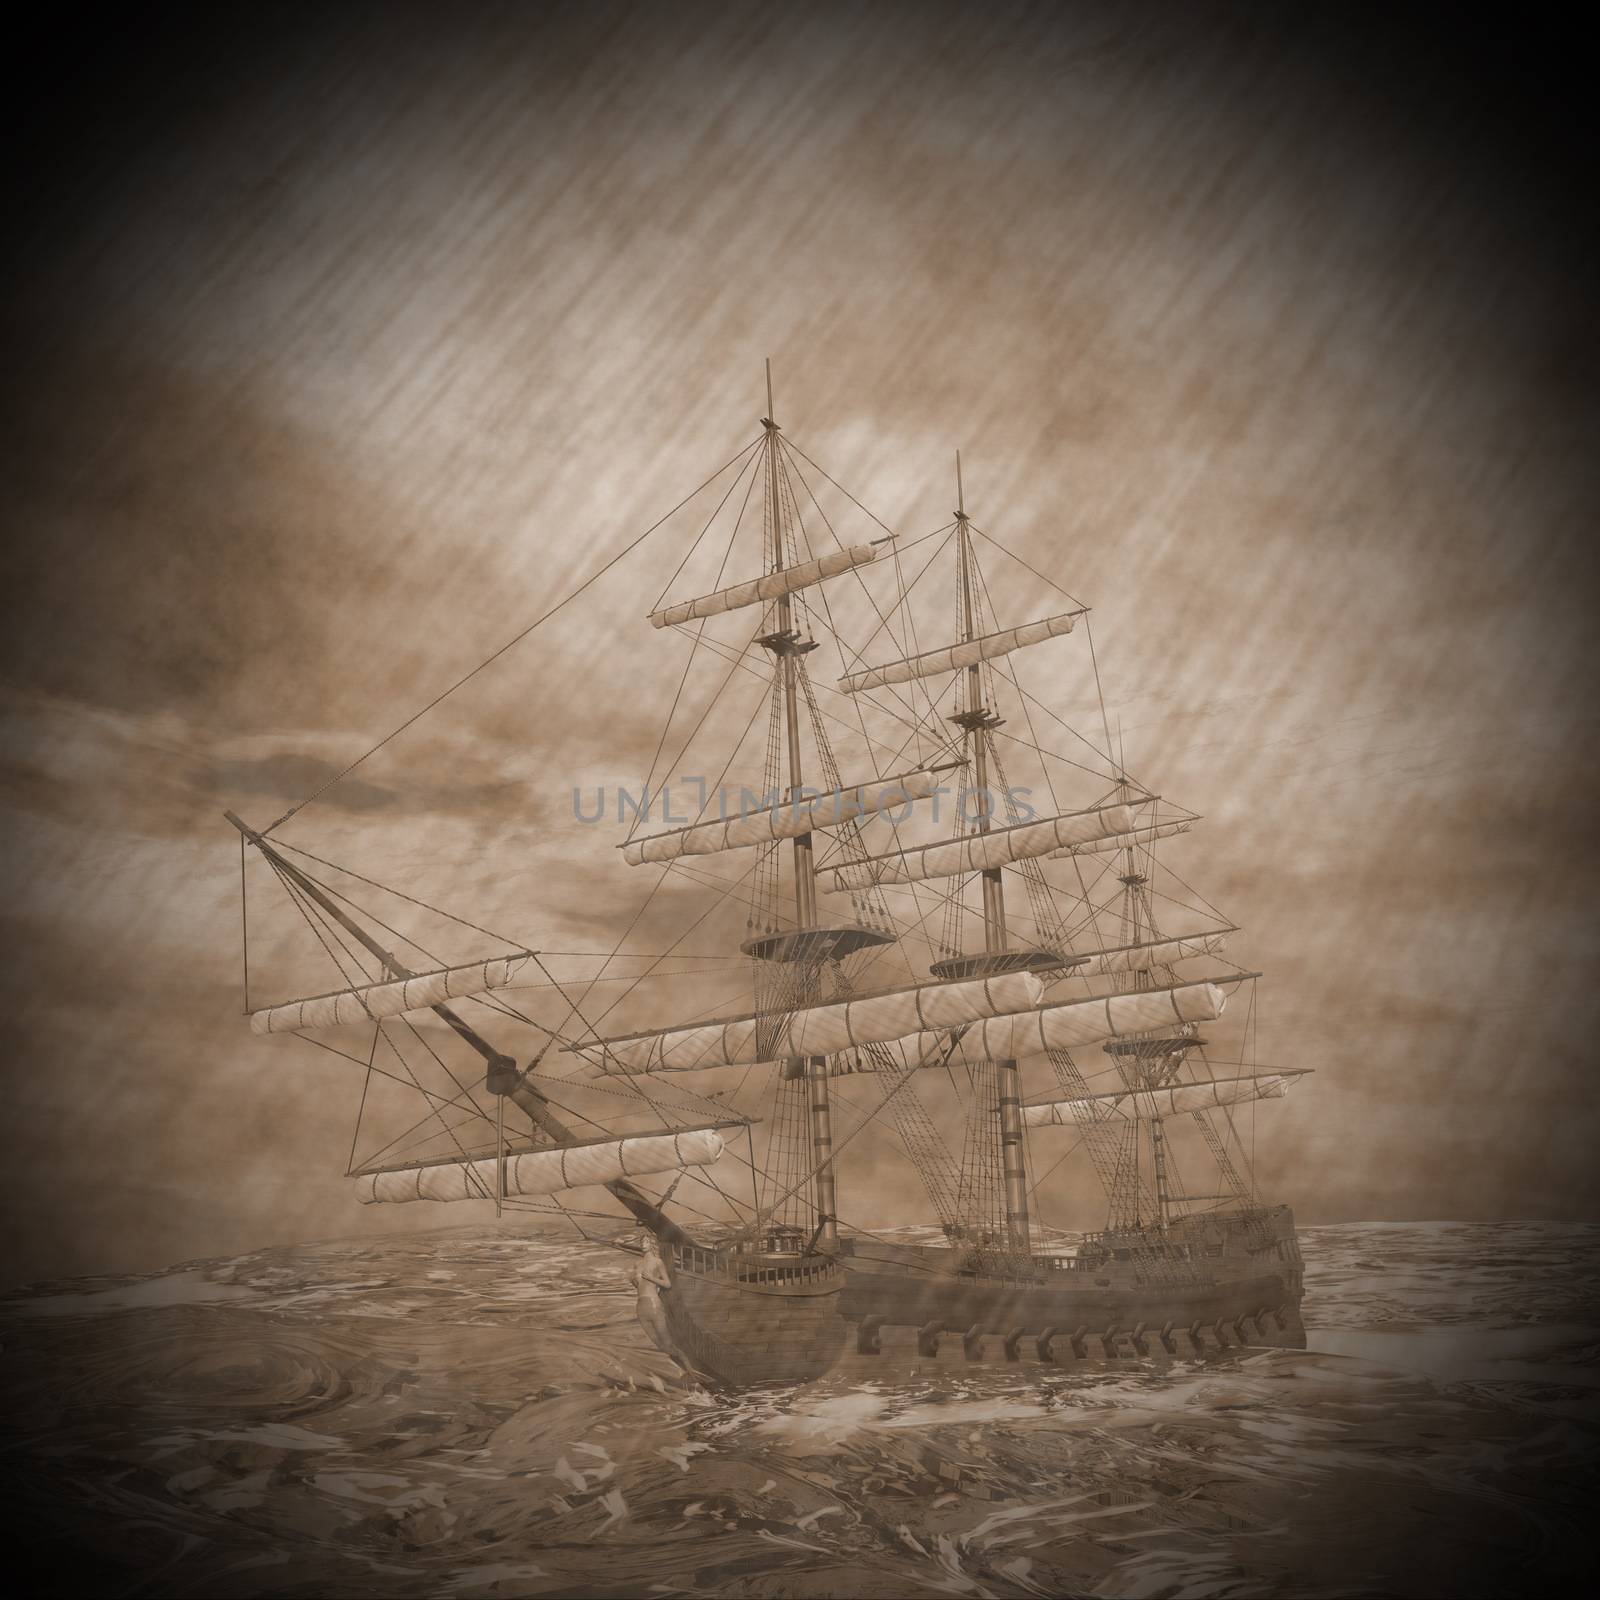 Old ship lost in the middle of a raining storm on ocean